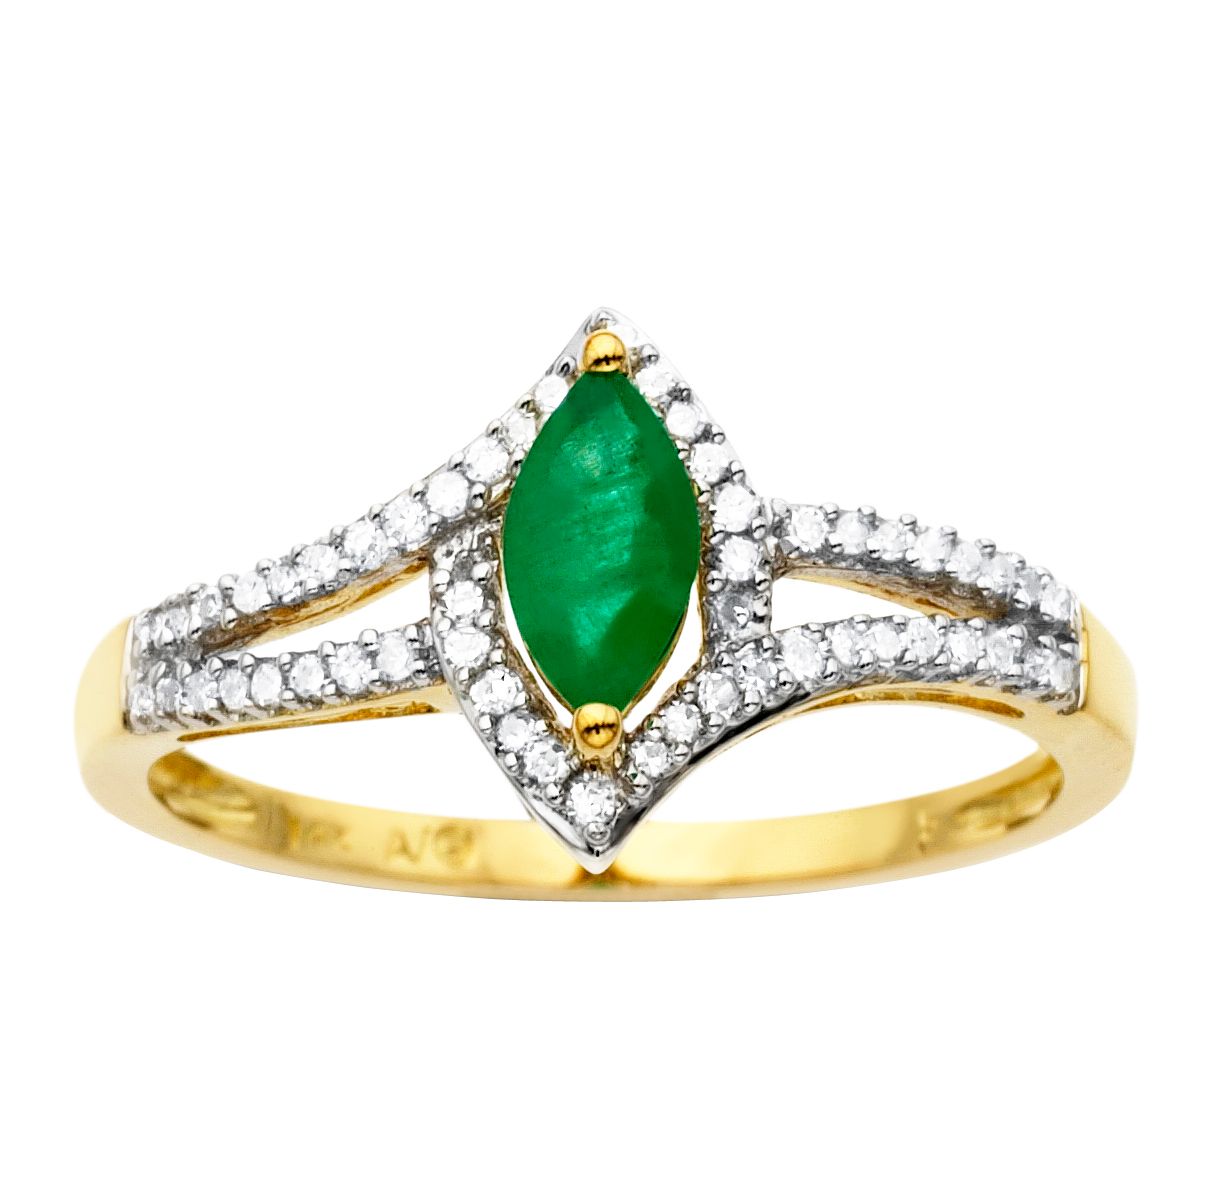 PRICE DROP! Navette Emerald and Diamond Ring. 10K Yellow Gold